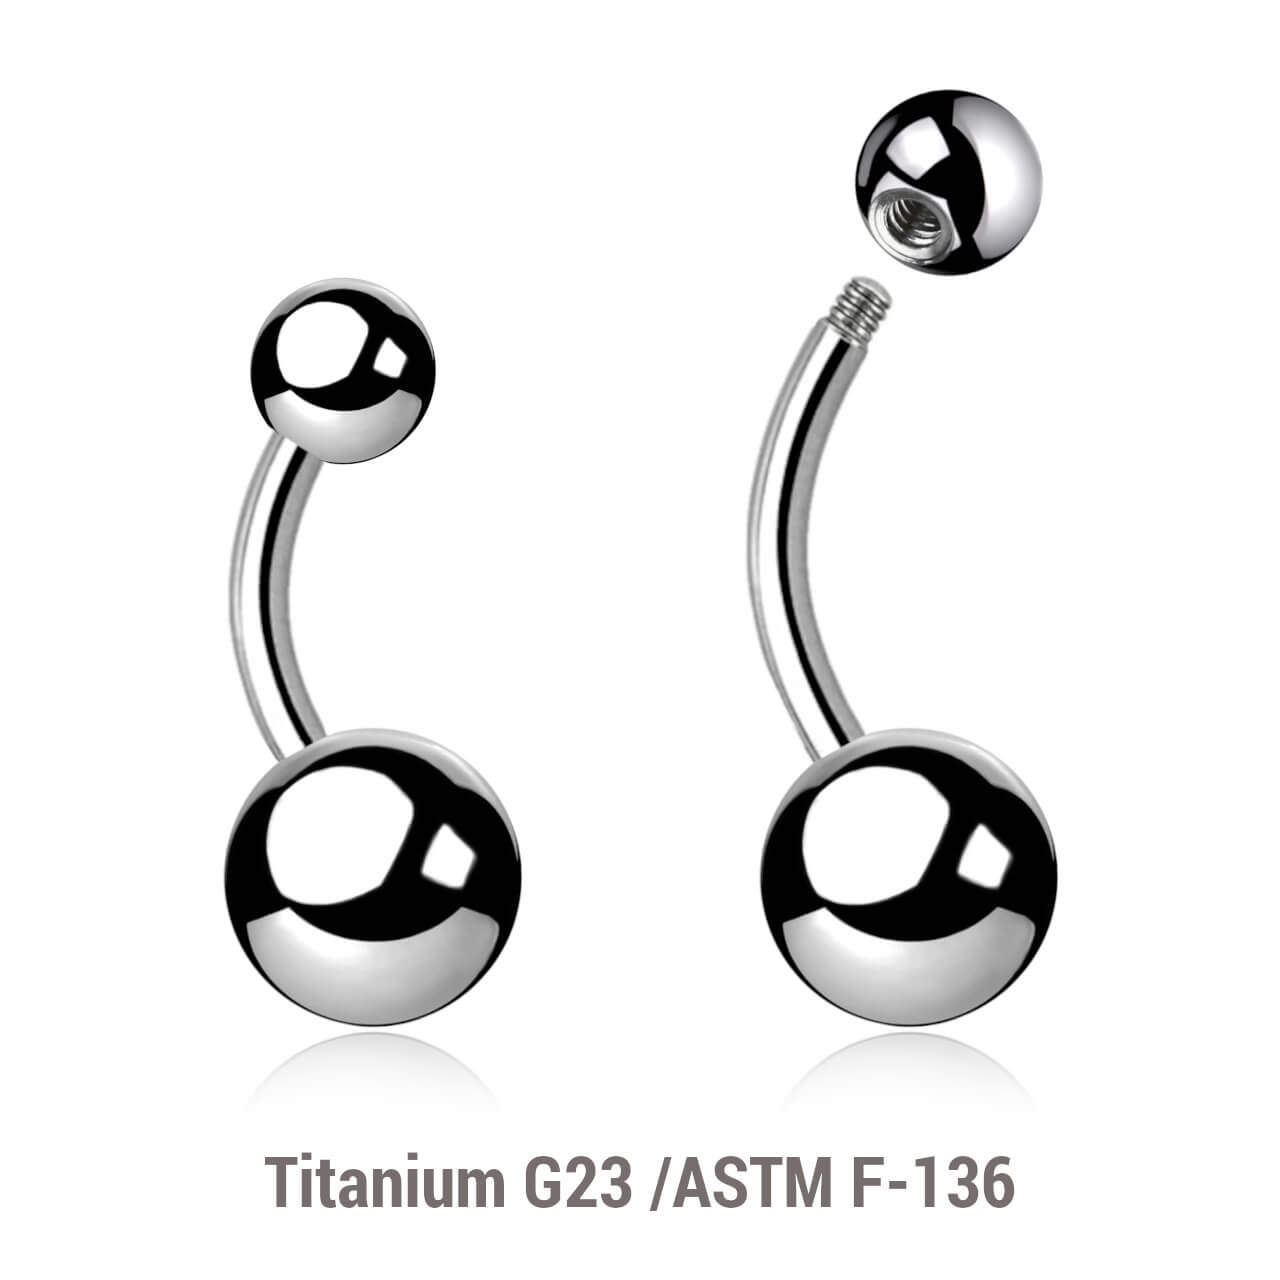 TBN16B58 Lot of 10 high polished G23 titanium belly bananas, Thickness 1.6mm, Ball size 5 + 8mm